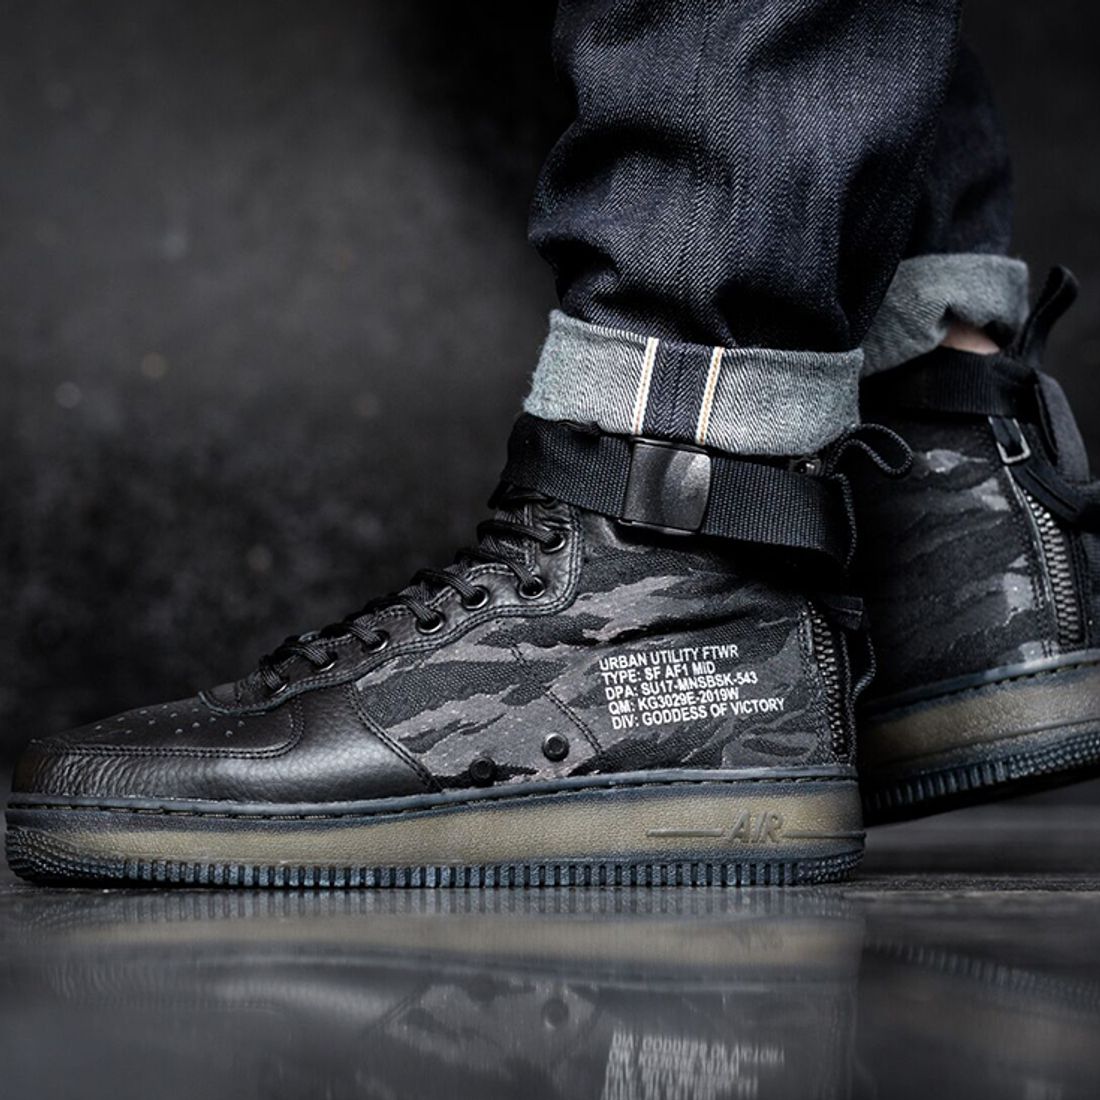 Nike Modify the Height of the SF-AF1 - Sneaker Freaker